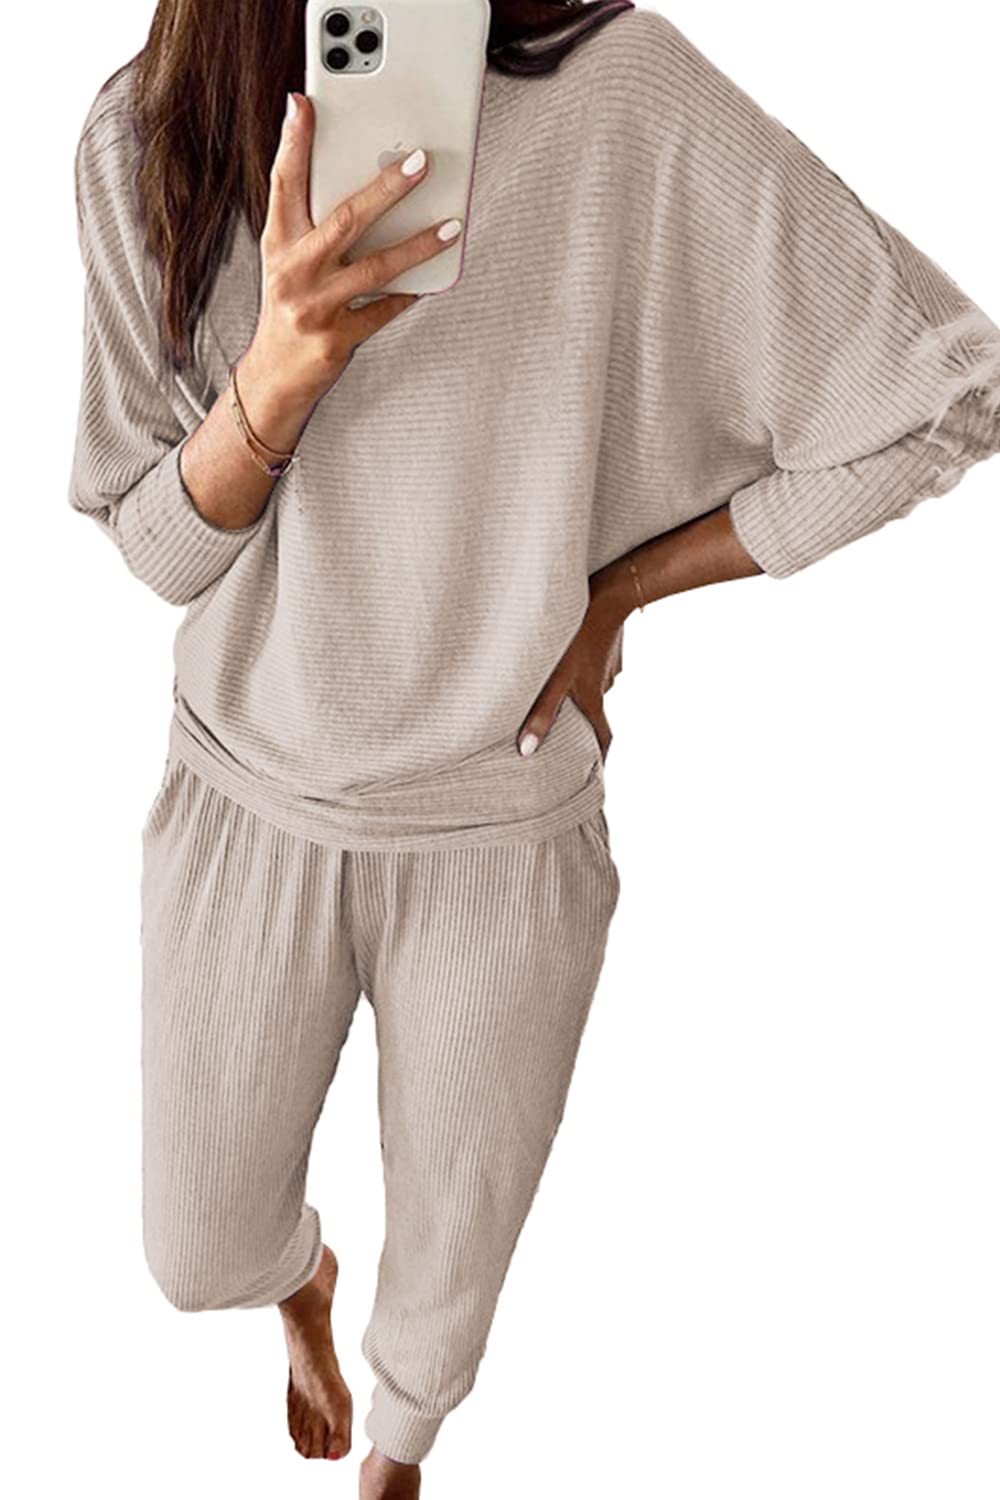 Women Fall Clothes Long Sleeve Set Fall Outfits Tracksuit Clothes